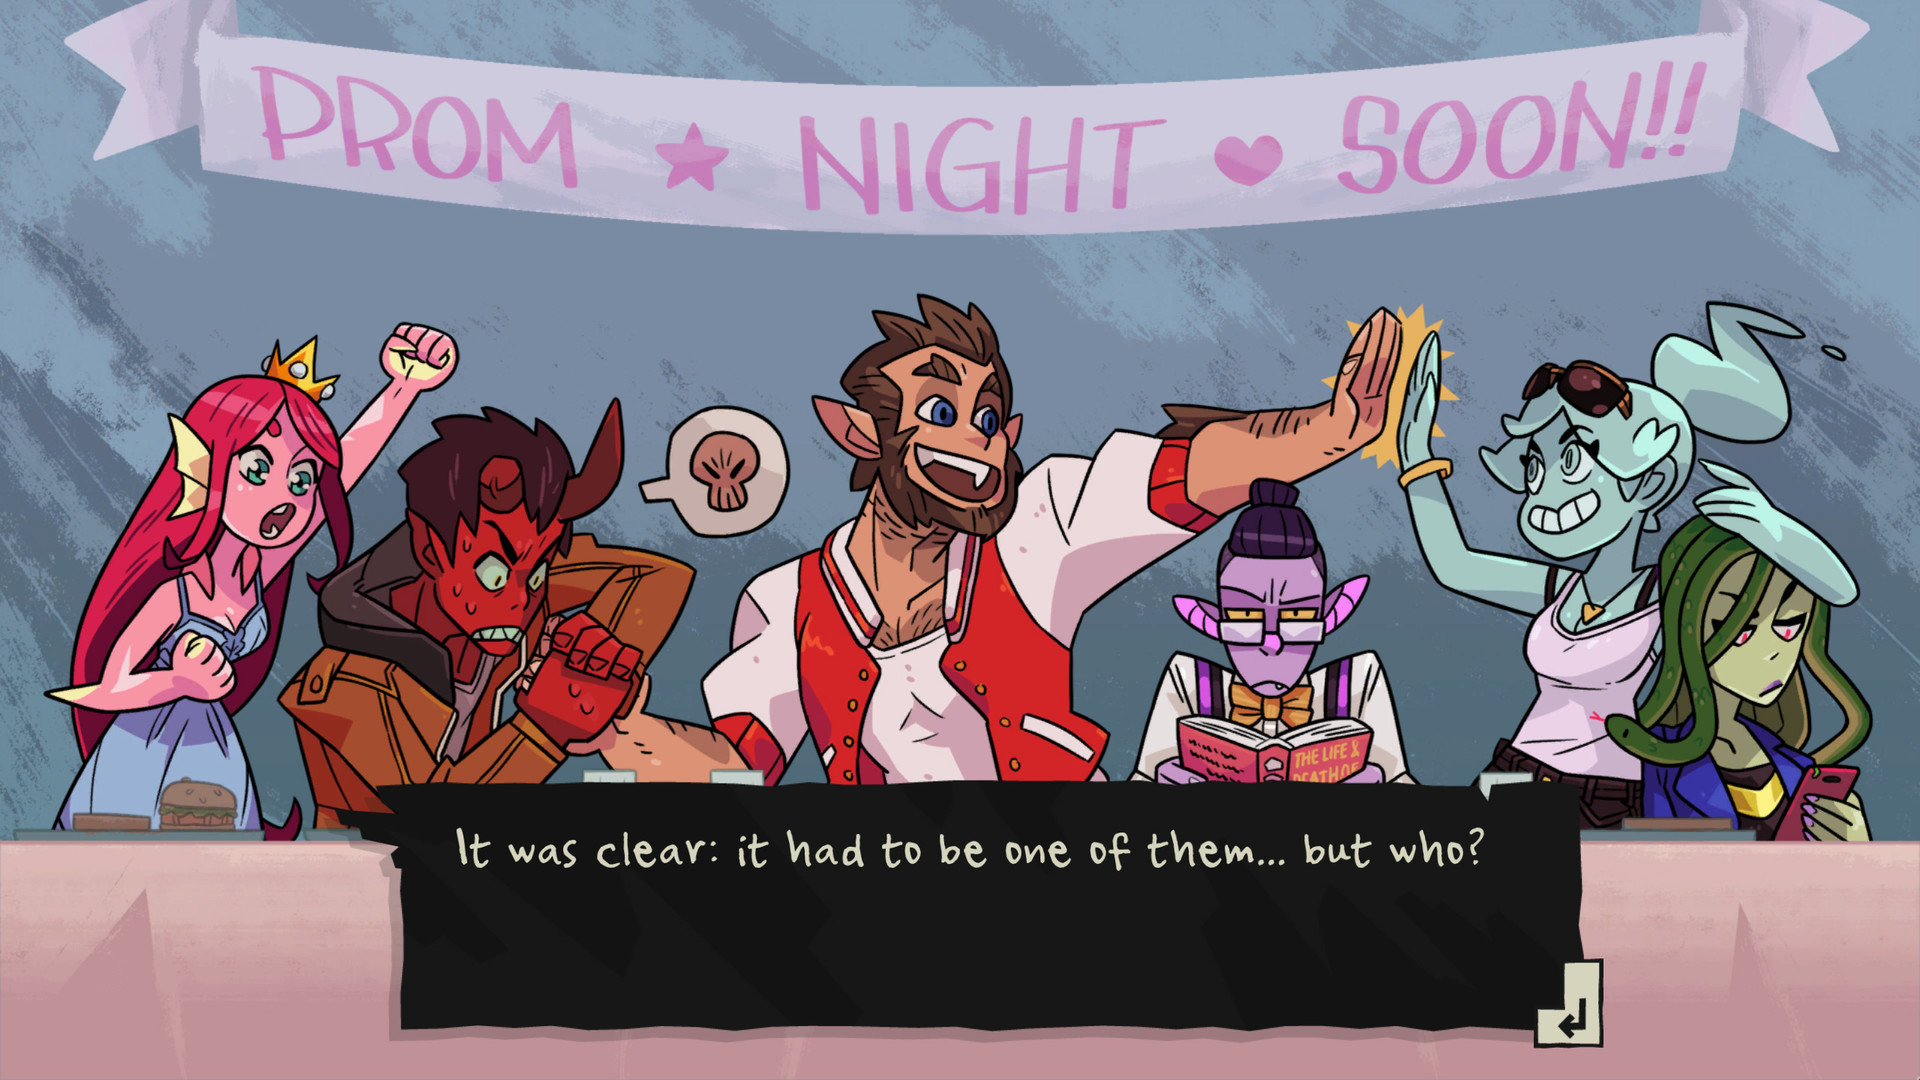 monster prom - Prom Night Soon!! It was clear it had to be one of them... but who?